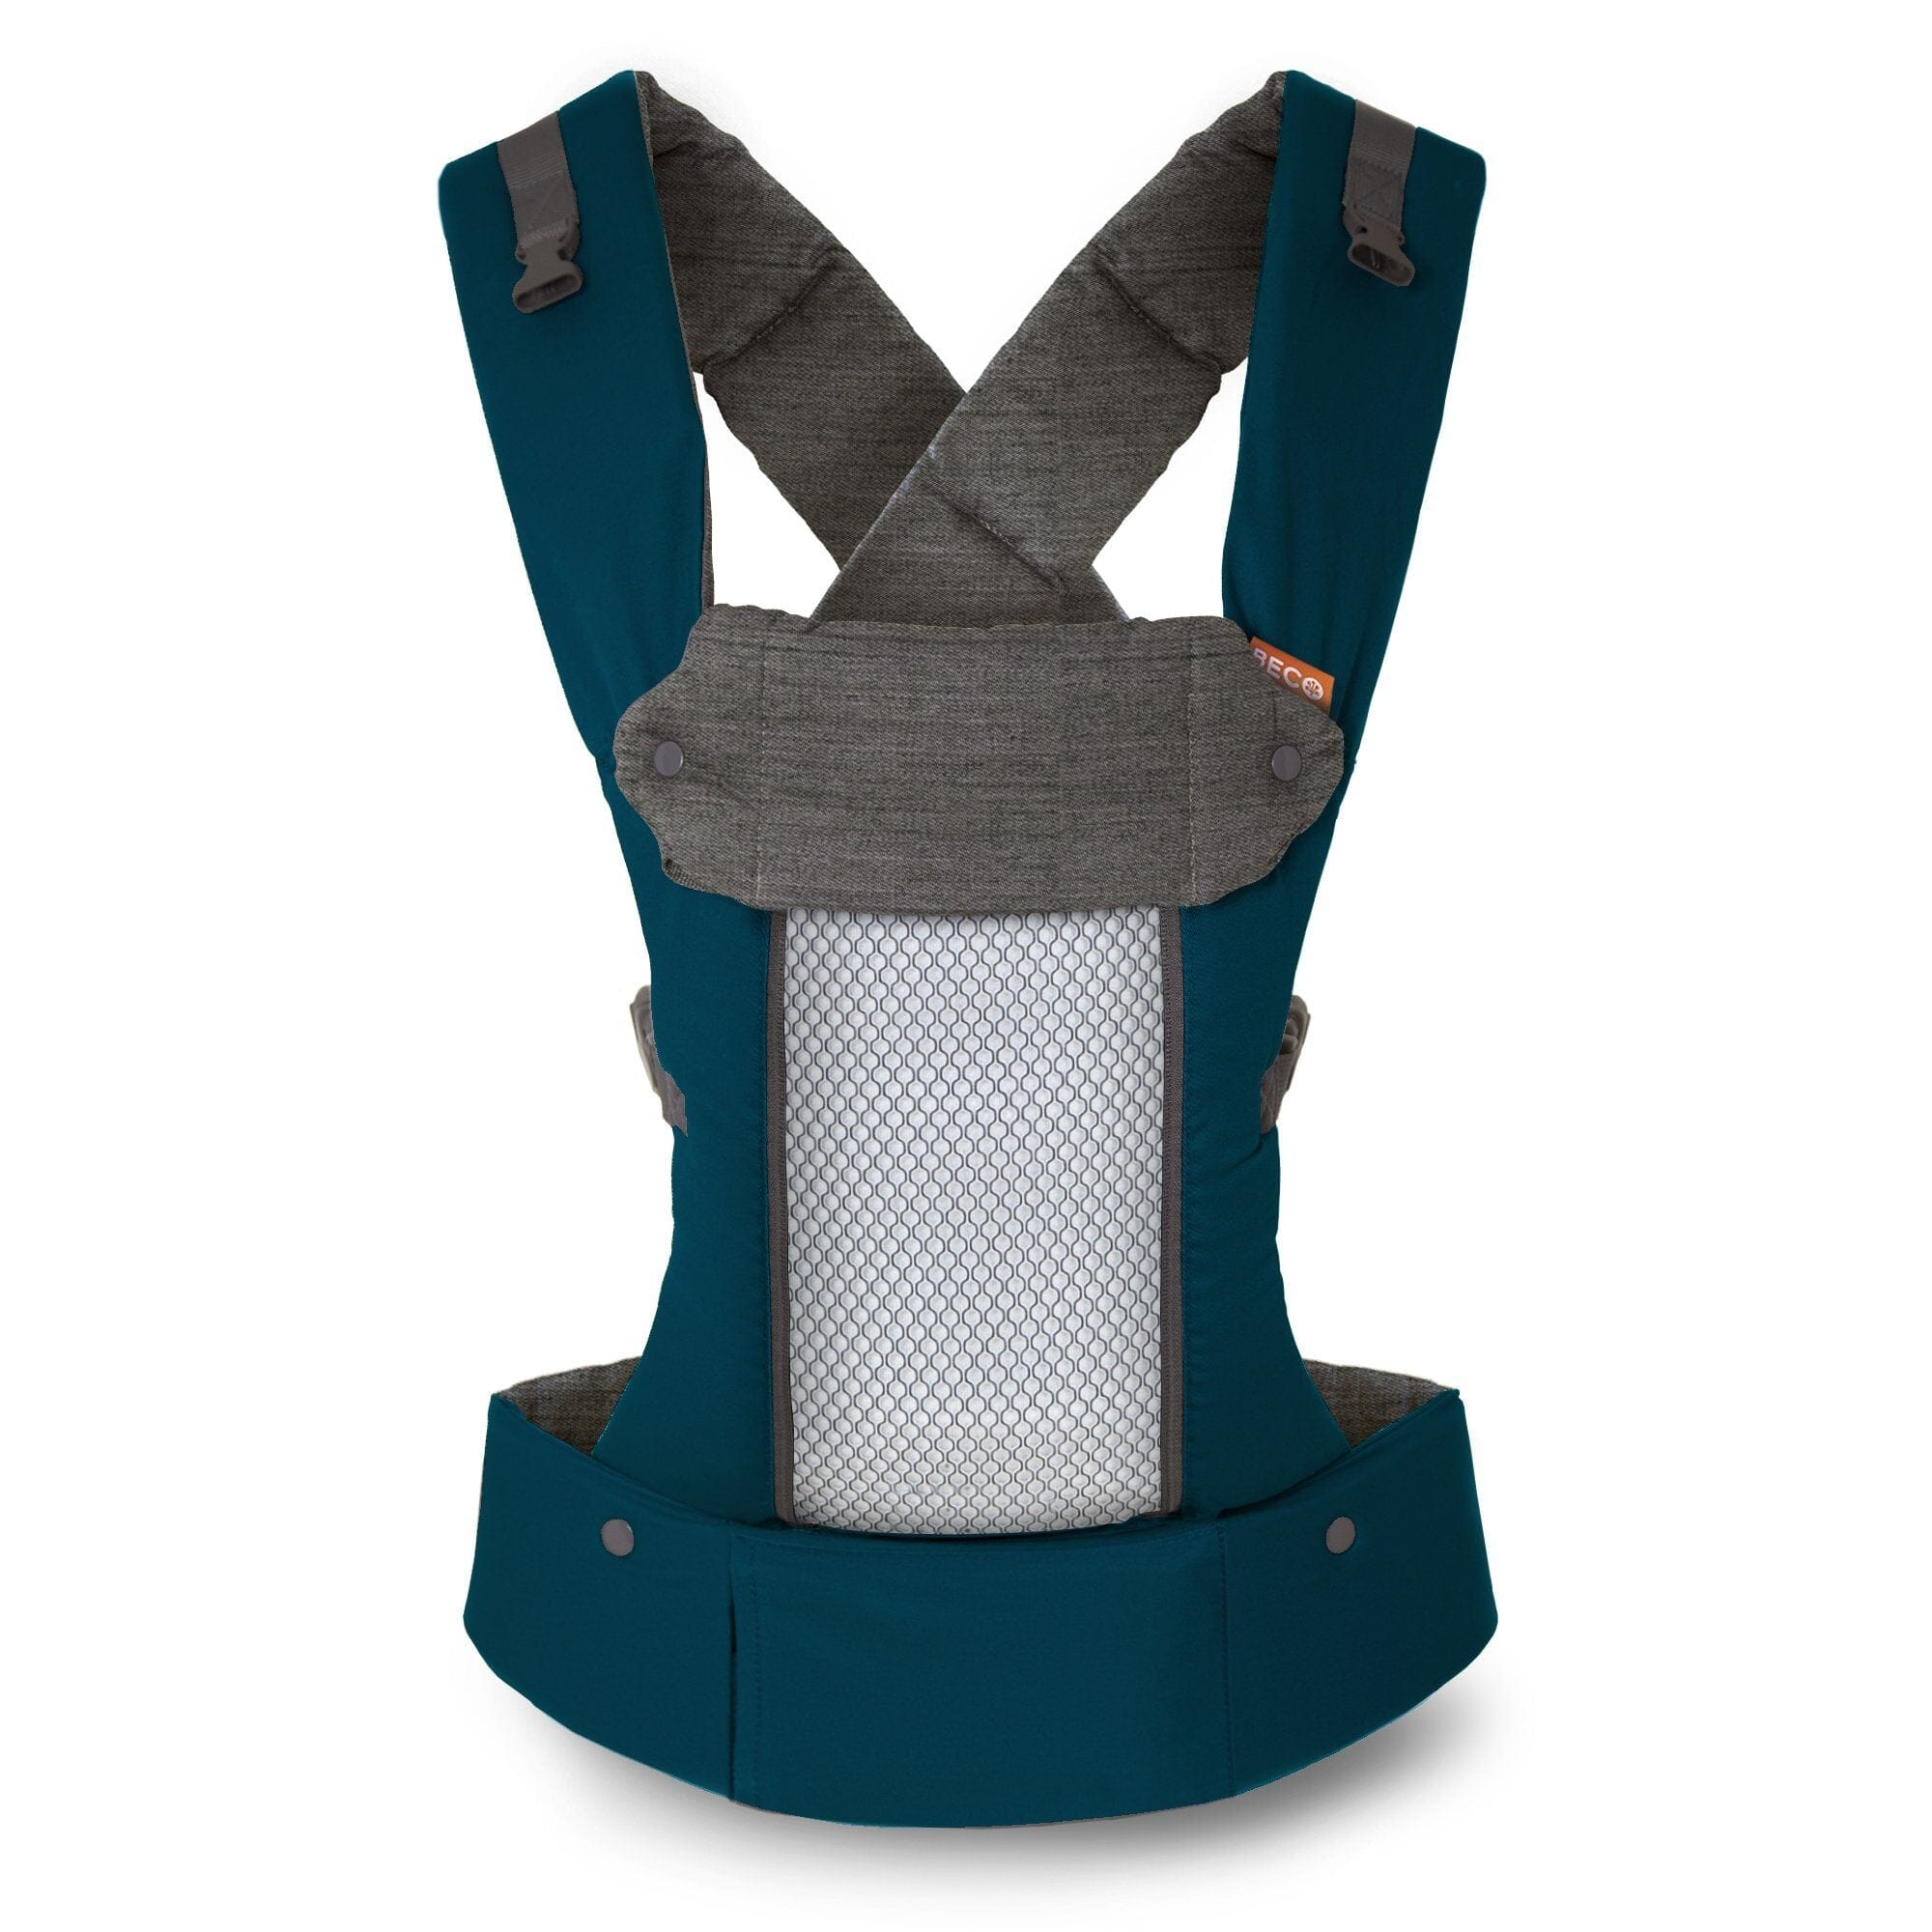 Beco 8 Baby Carrier Teal